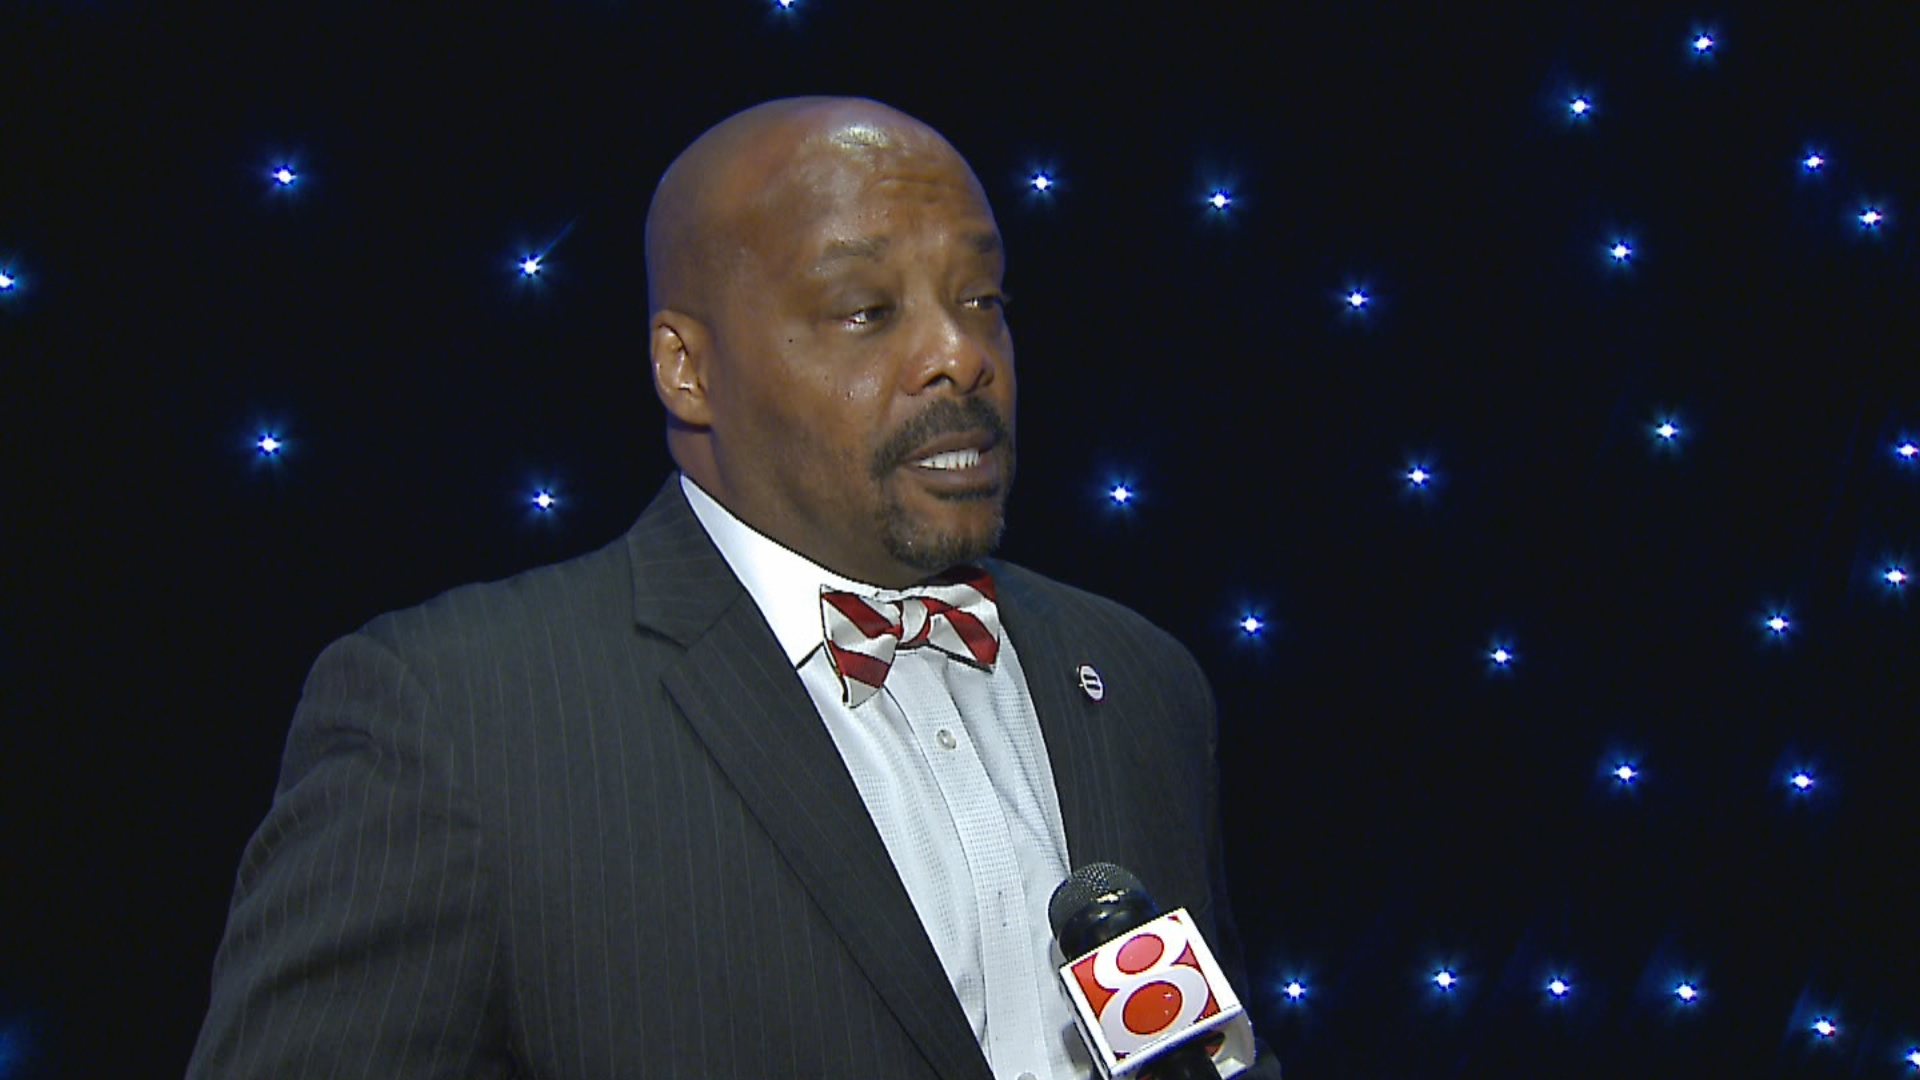 Indianapolis Urban League celebrations equal opportunity in fundraiser luncheon